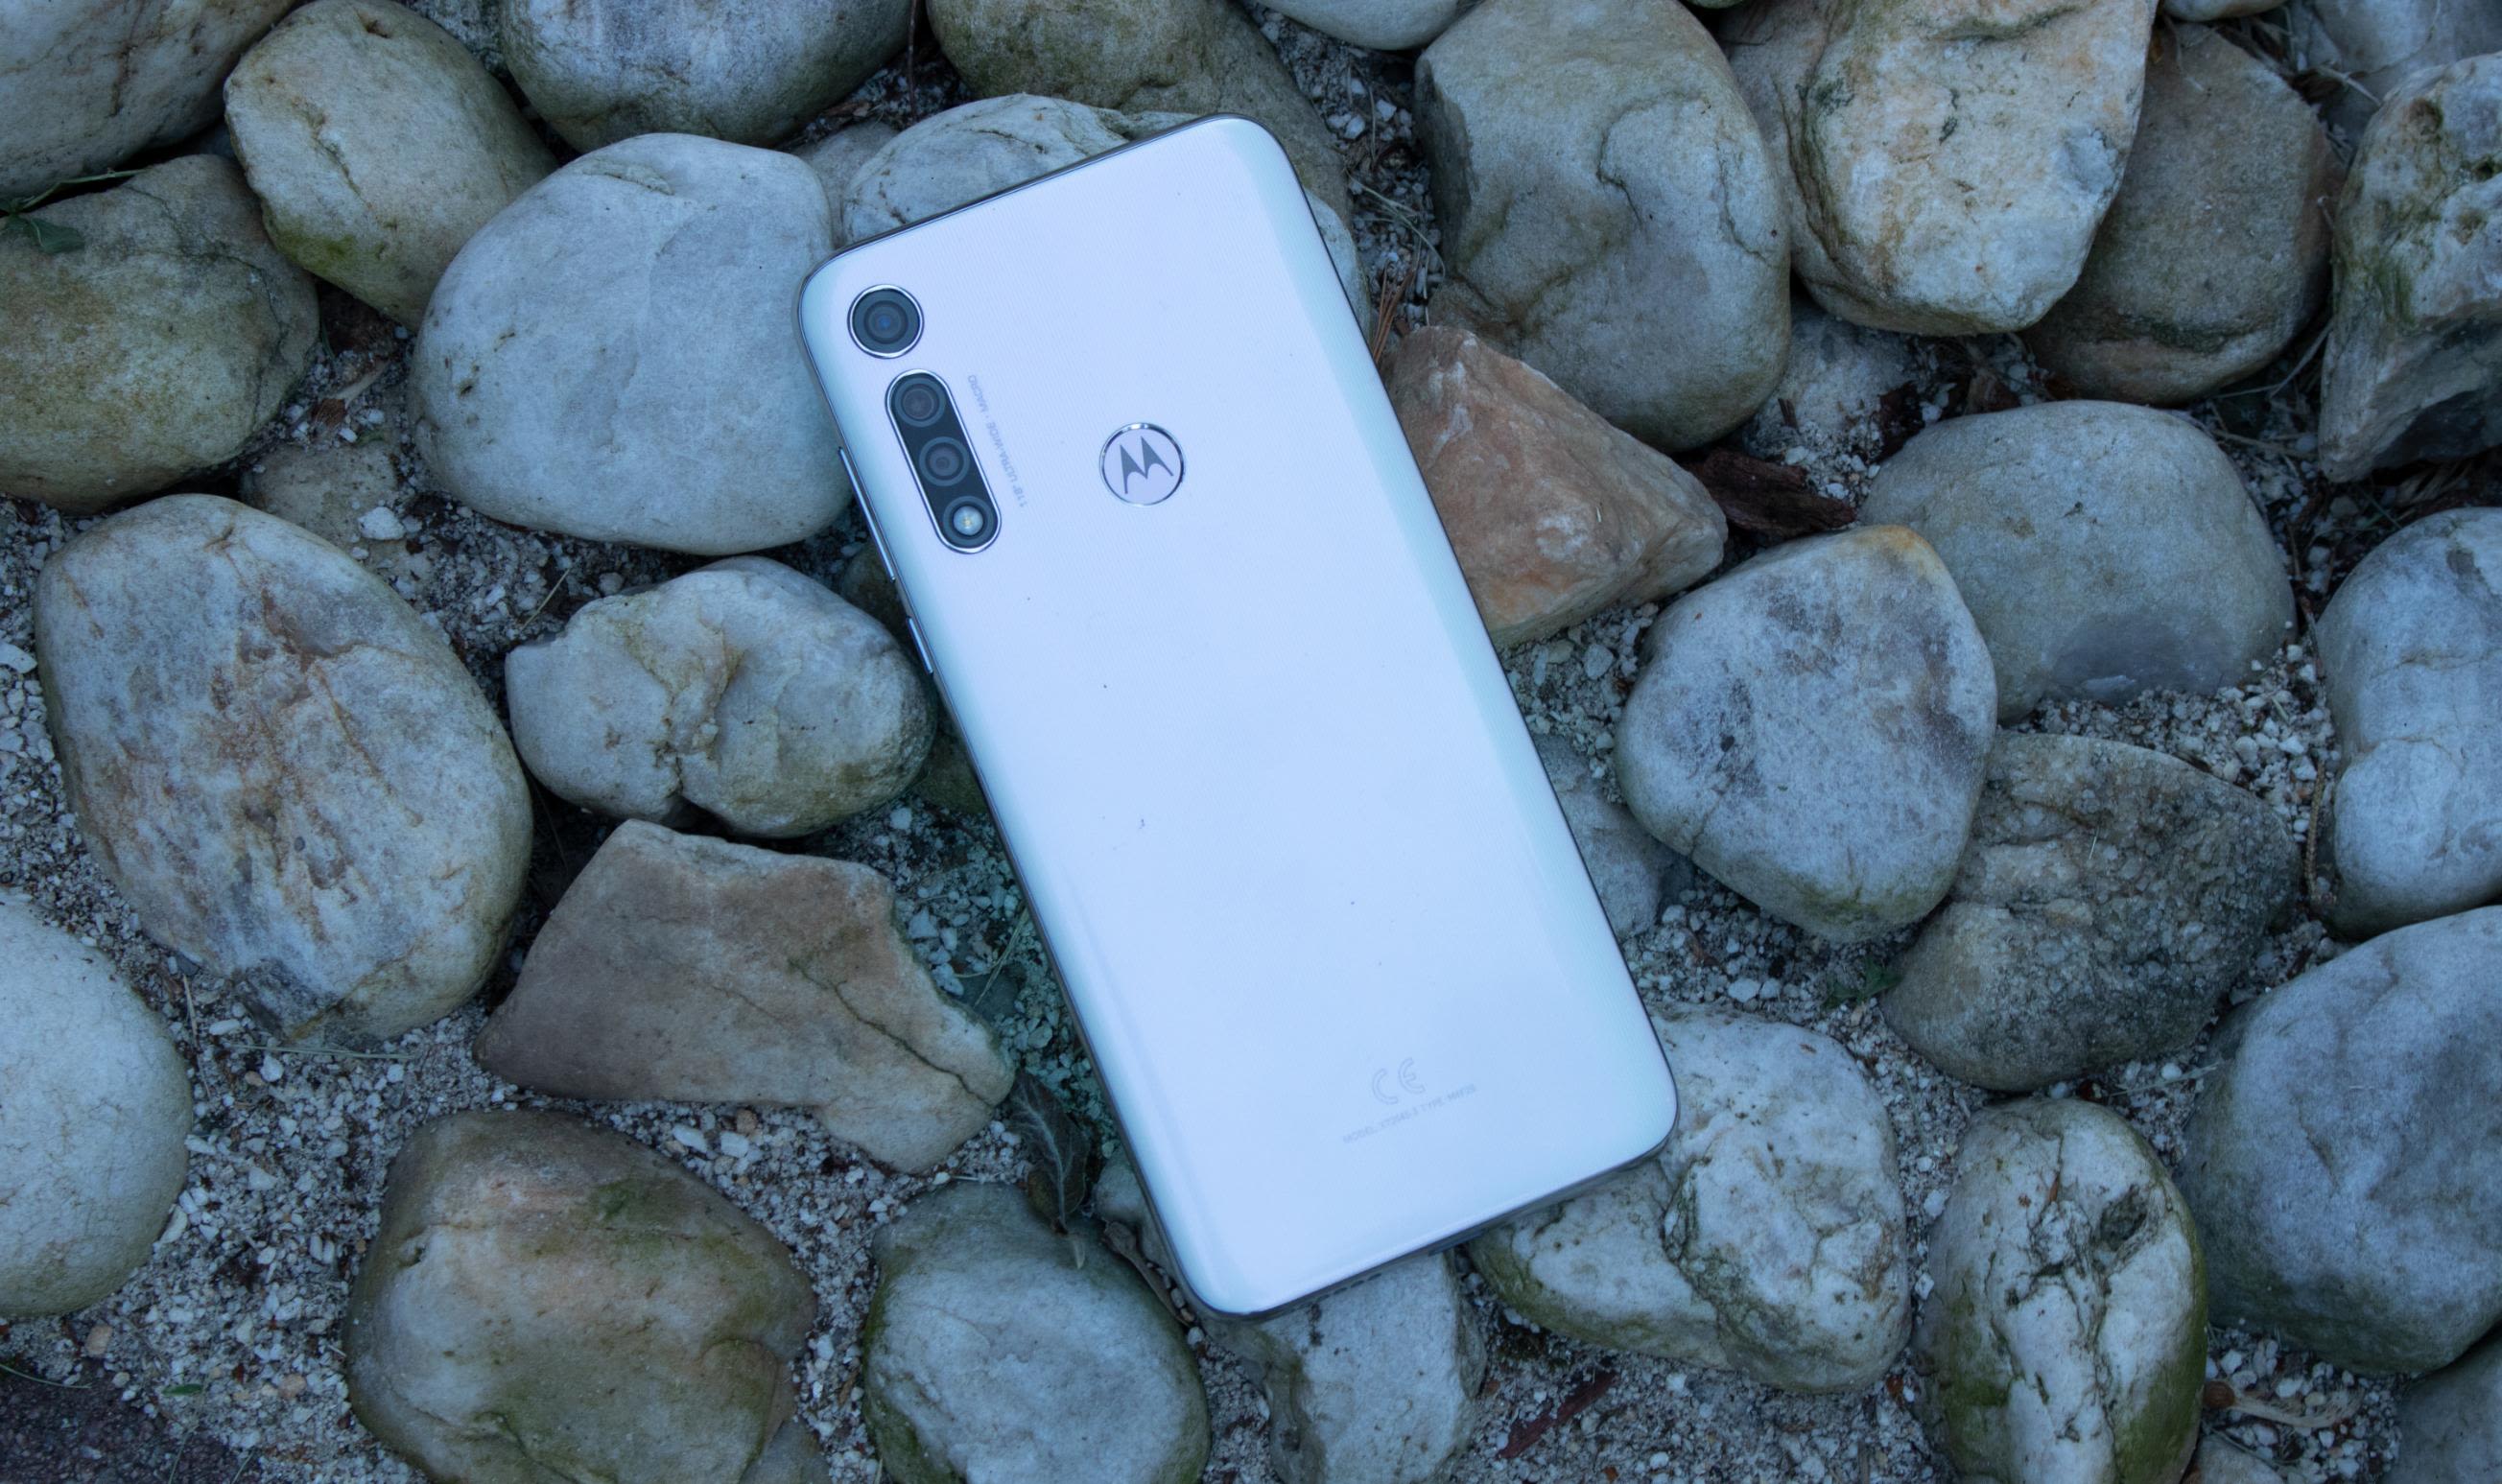 Go All Day and More with the Motorola Moto E4 Plus